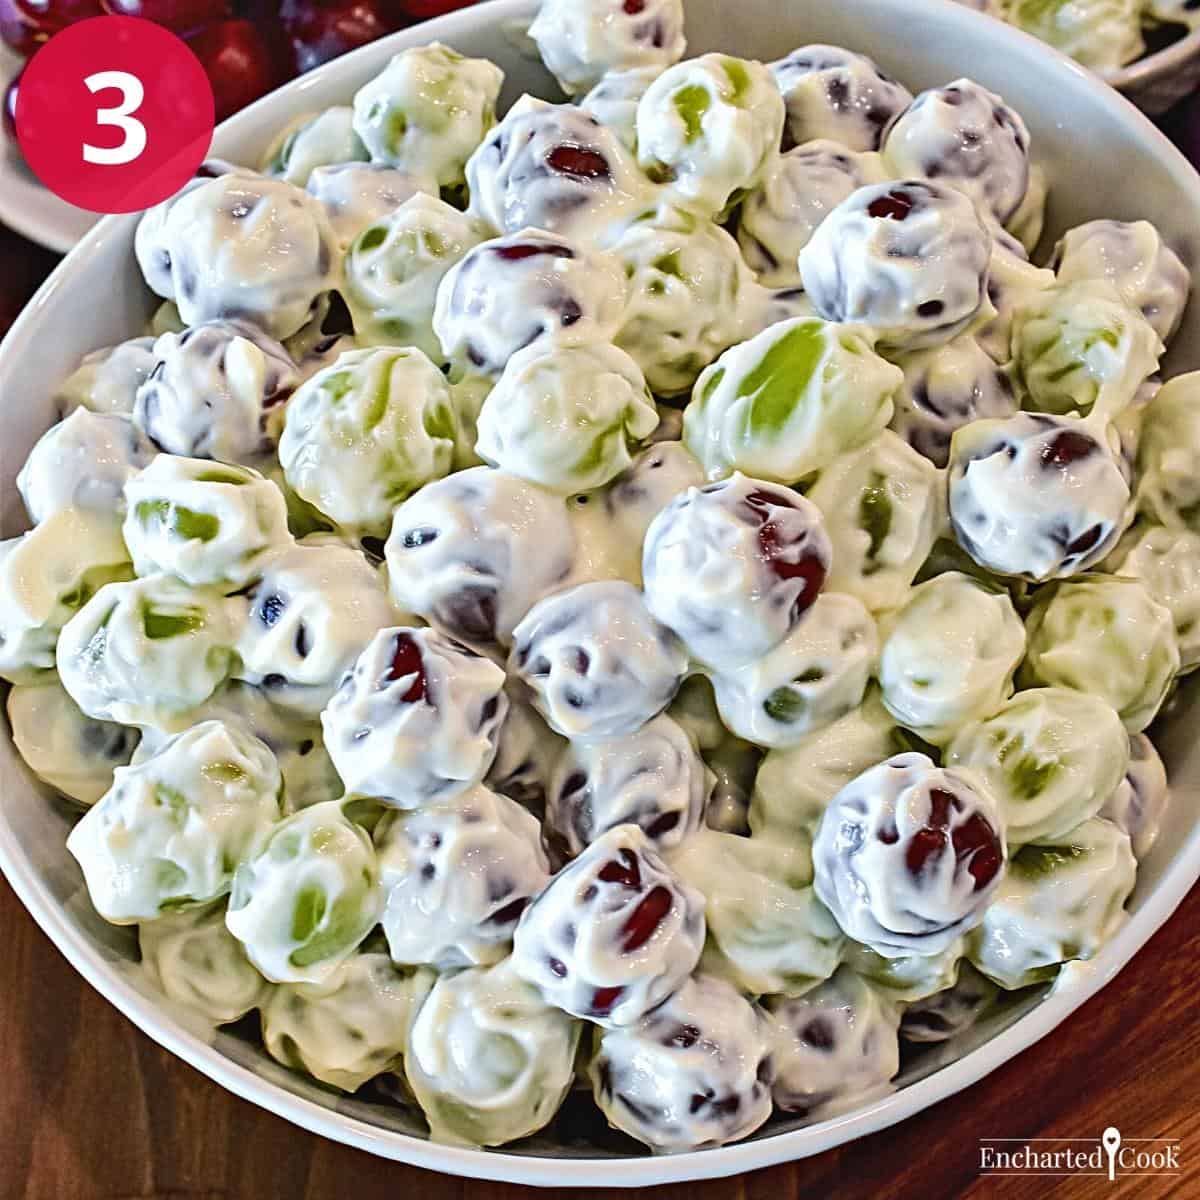 The grapes are completely covered with the creamy whit dressing.